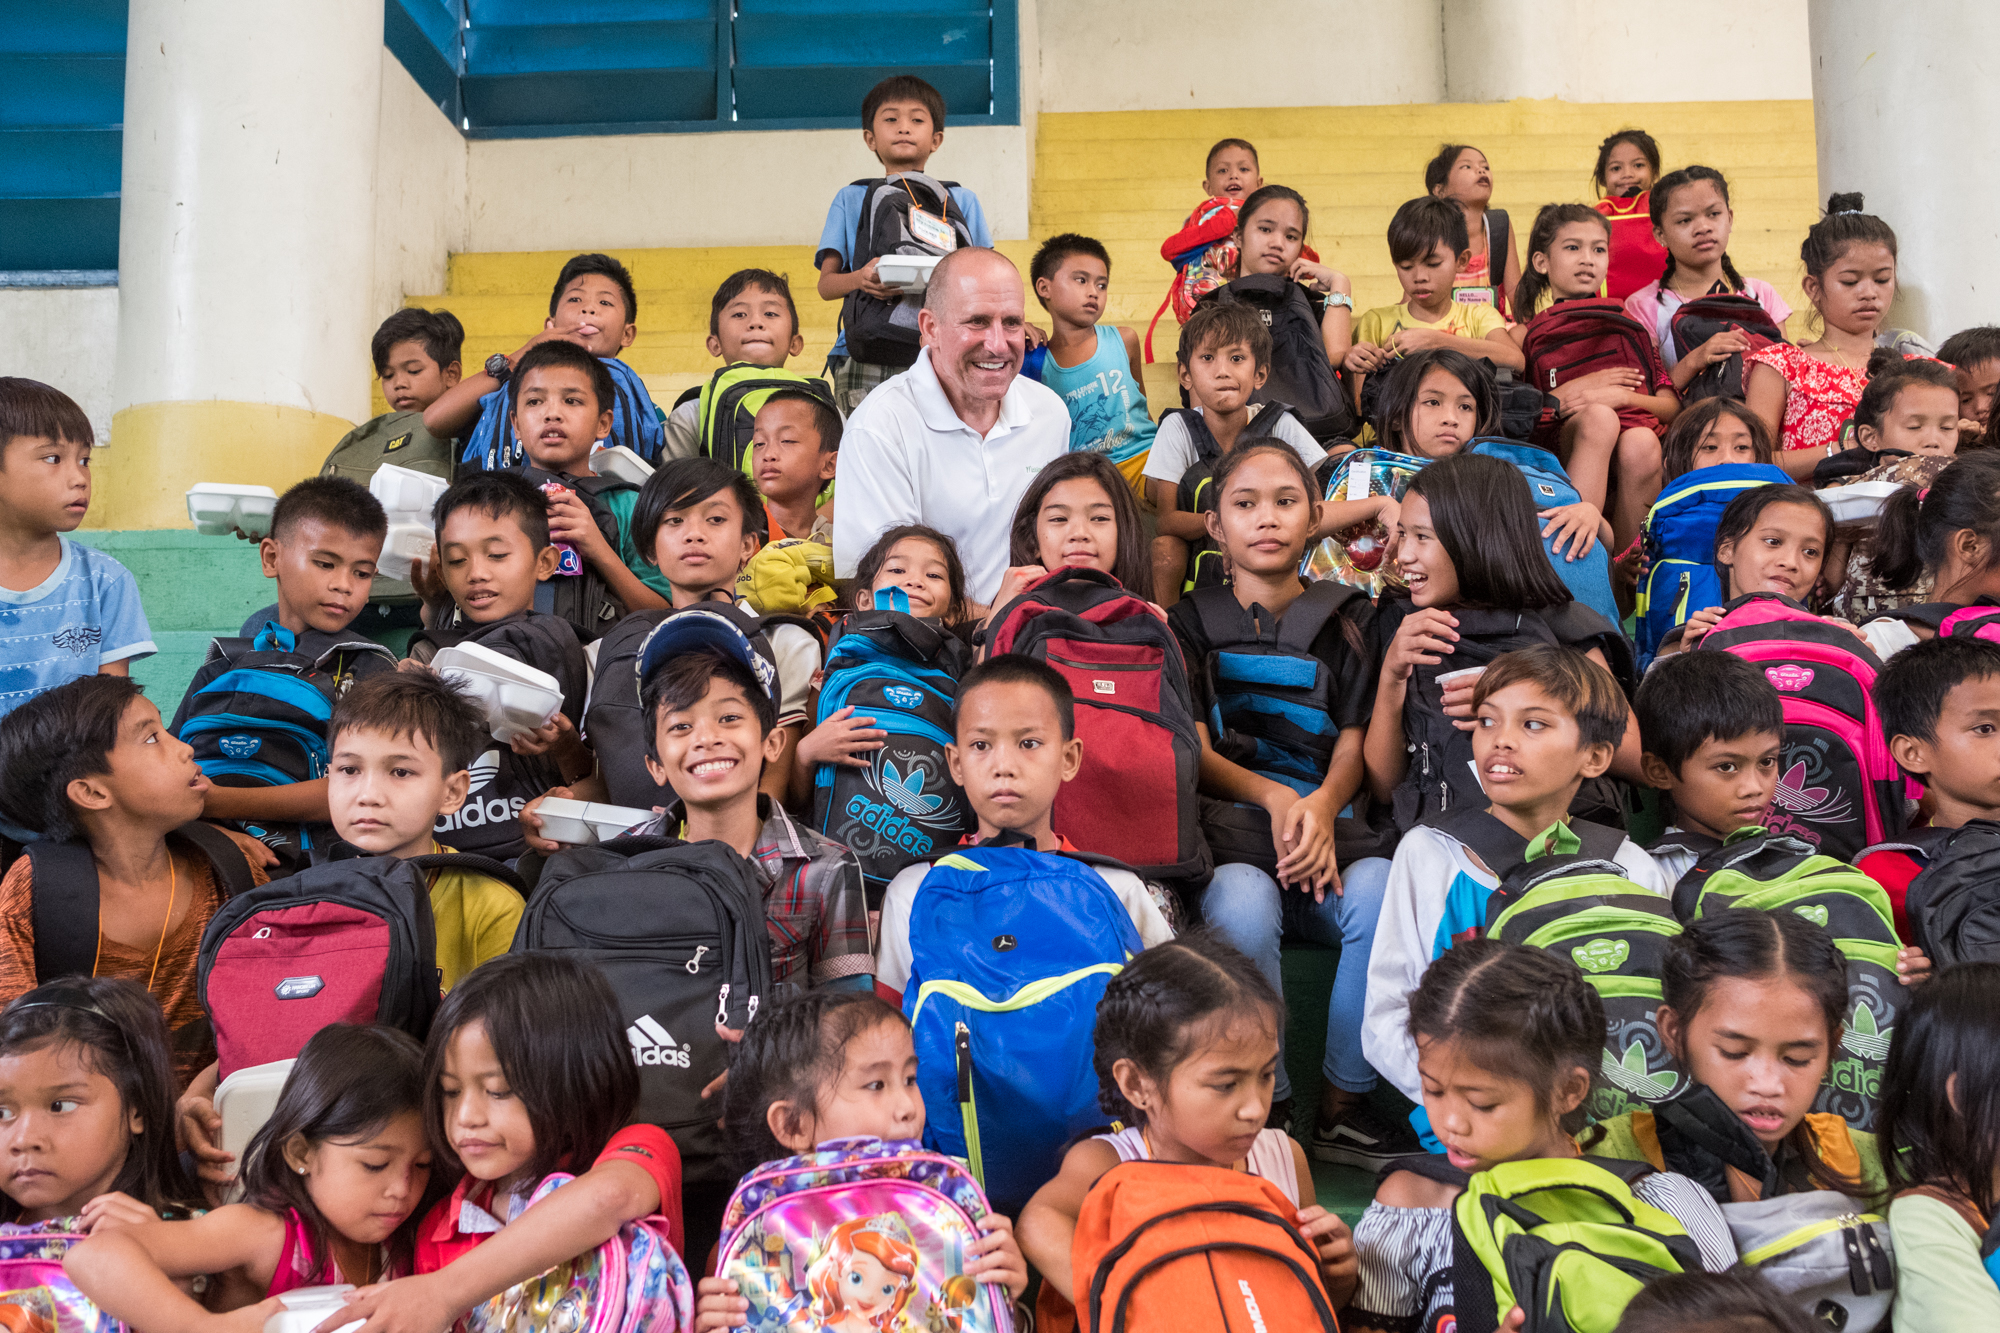  Frank Becker (top center) poses for a picture with students who received new backpacks filled with school supplies at a community-giving event in Cebu, Philippines. Because of Frank’s efforts, hundreds of children received supplies during this sabba